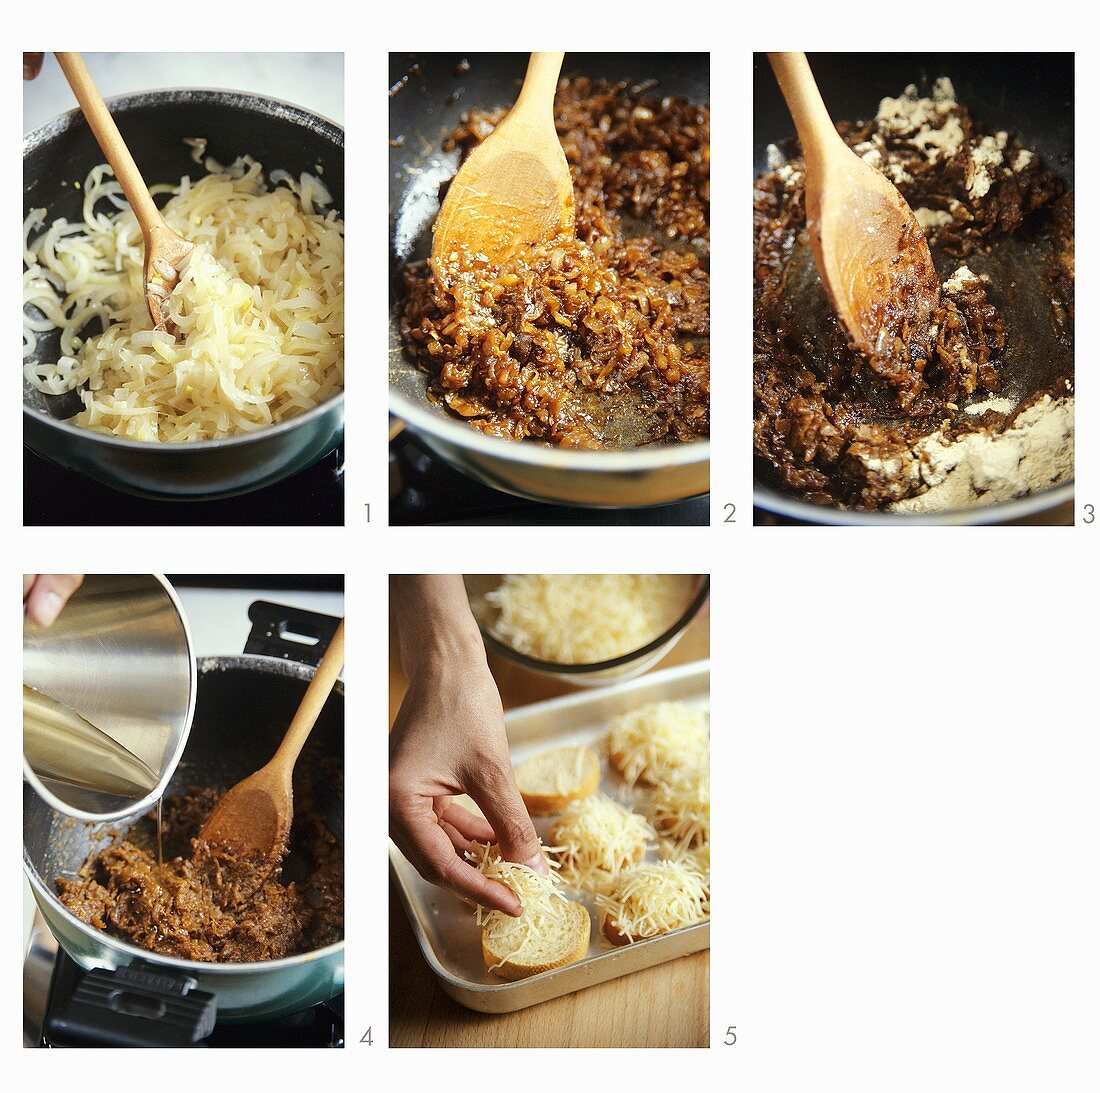 Making French onion soup